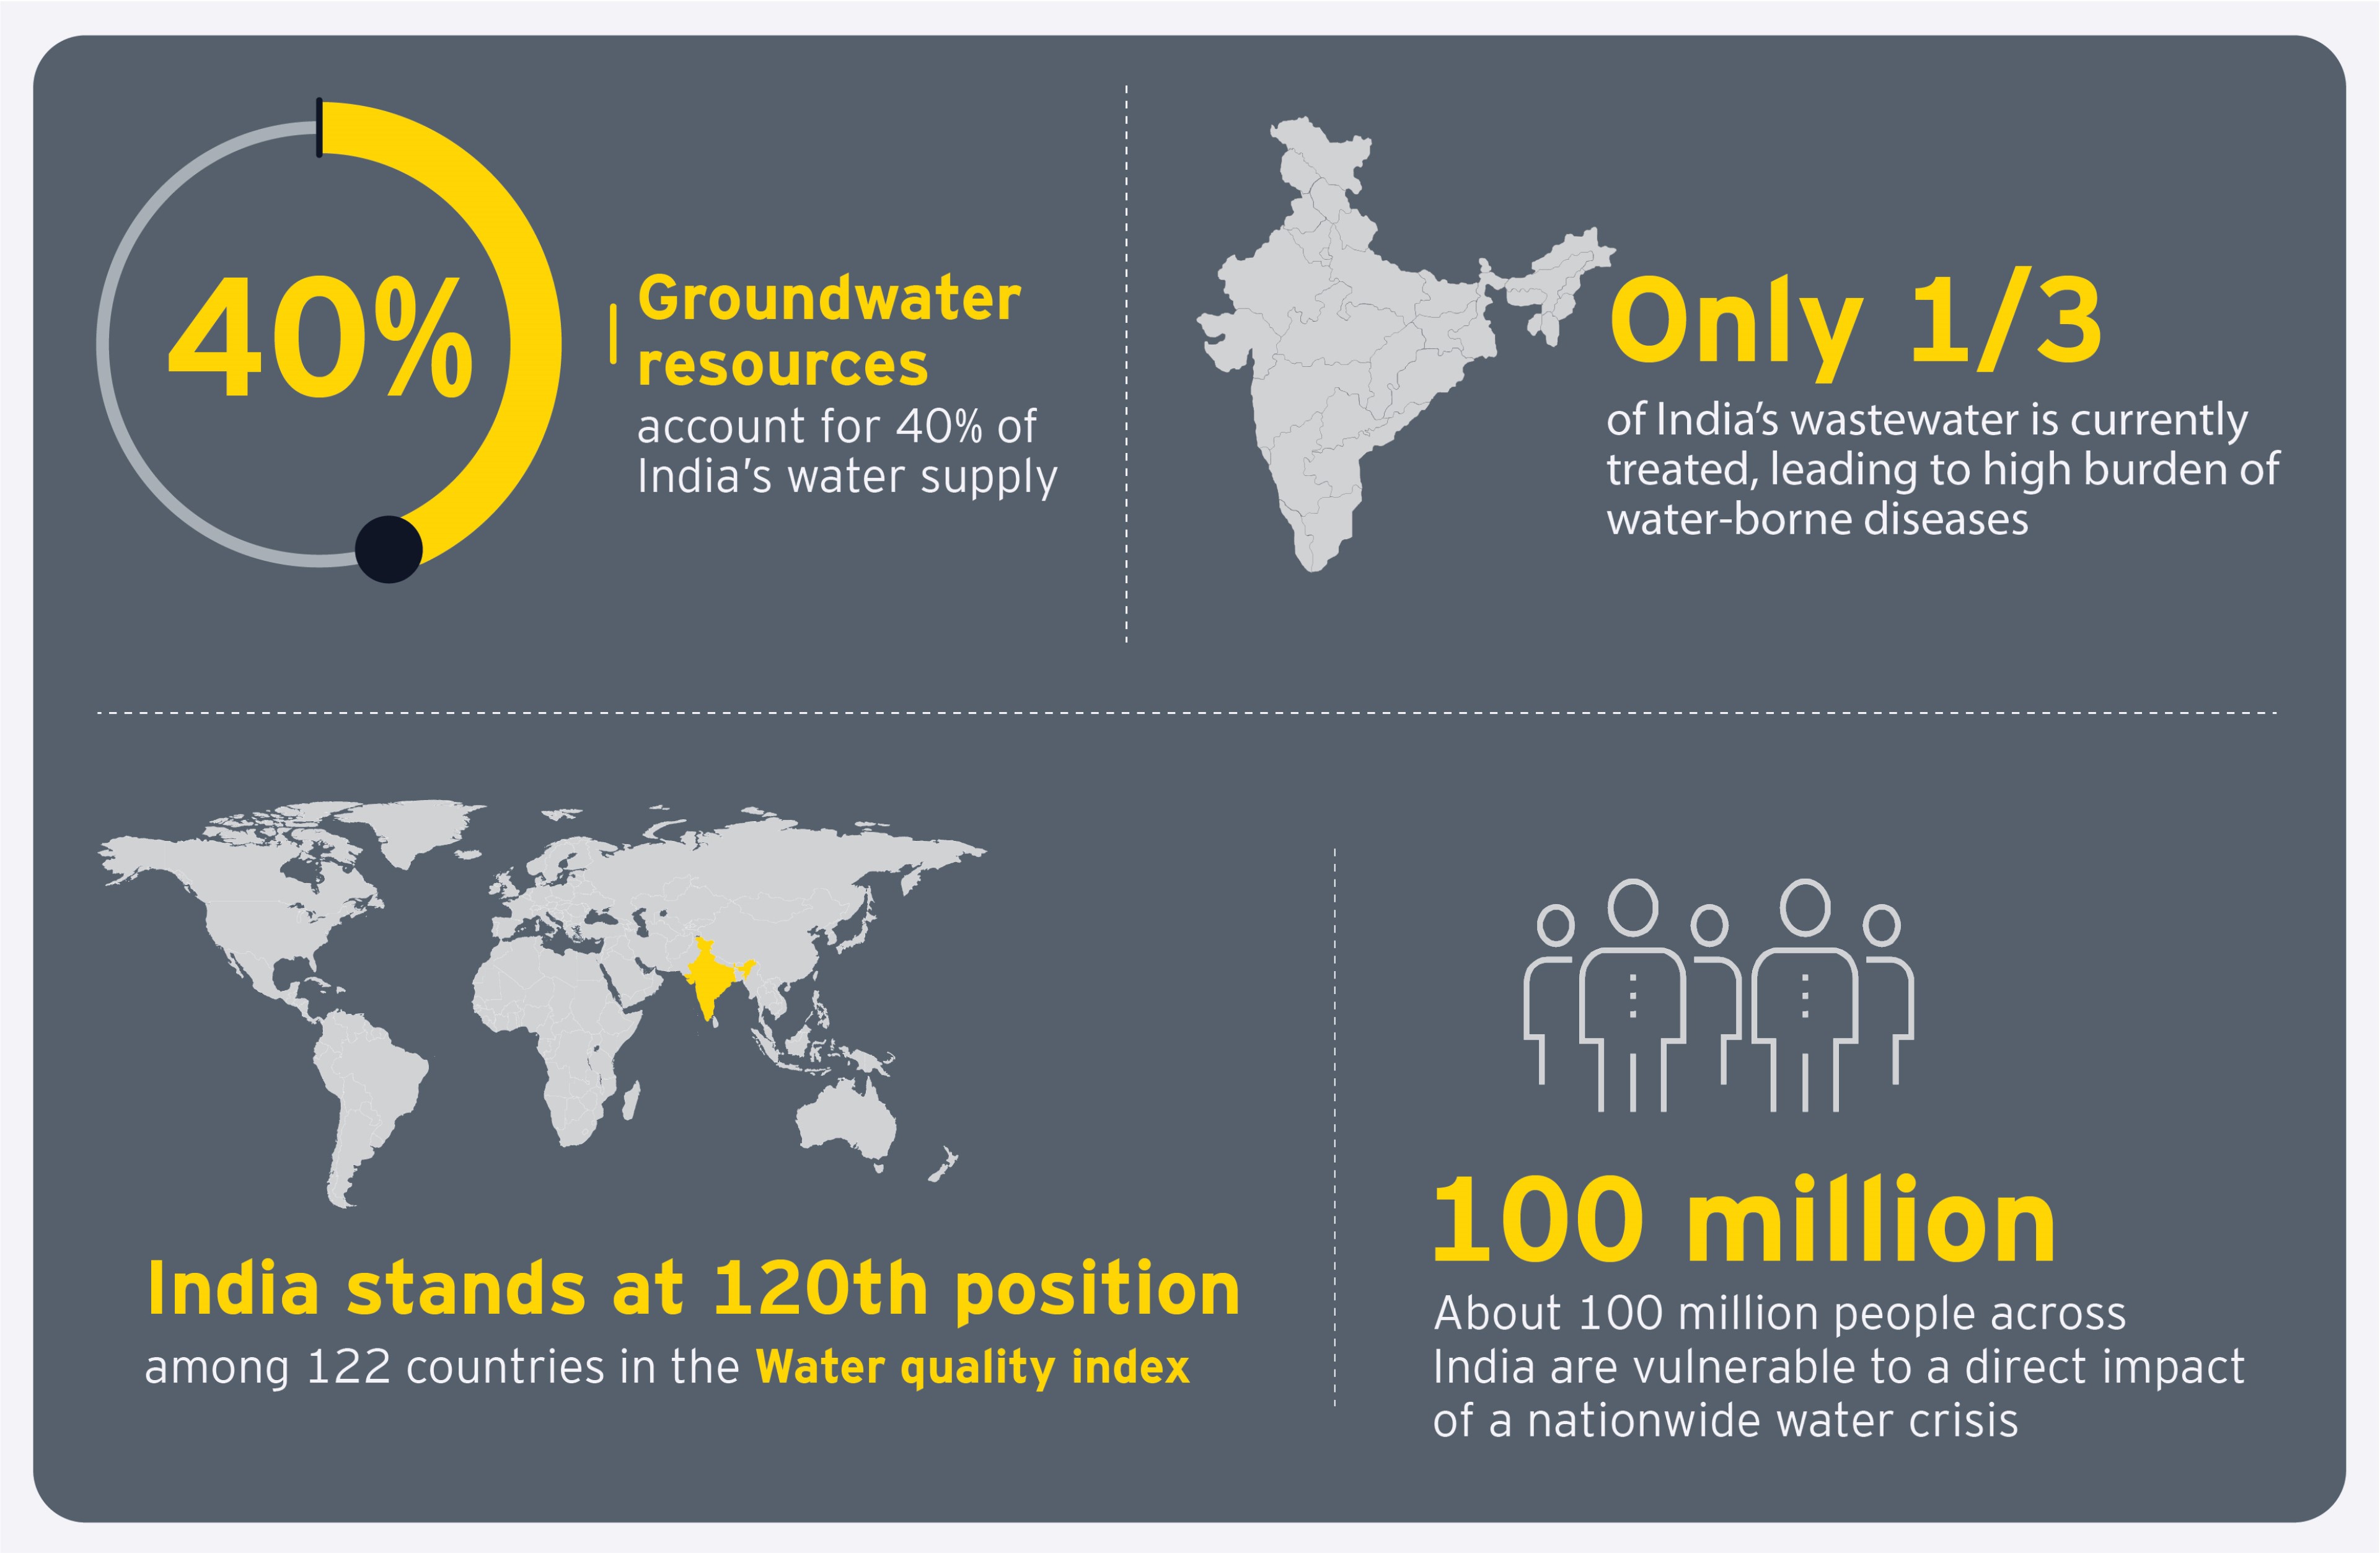 Assessment of Water Quality Index (WQI) of groundwater in India